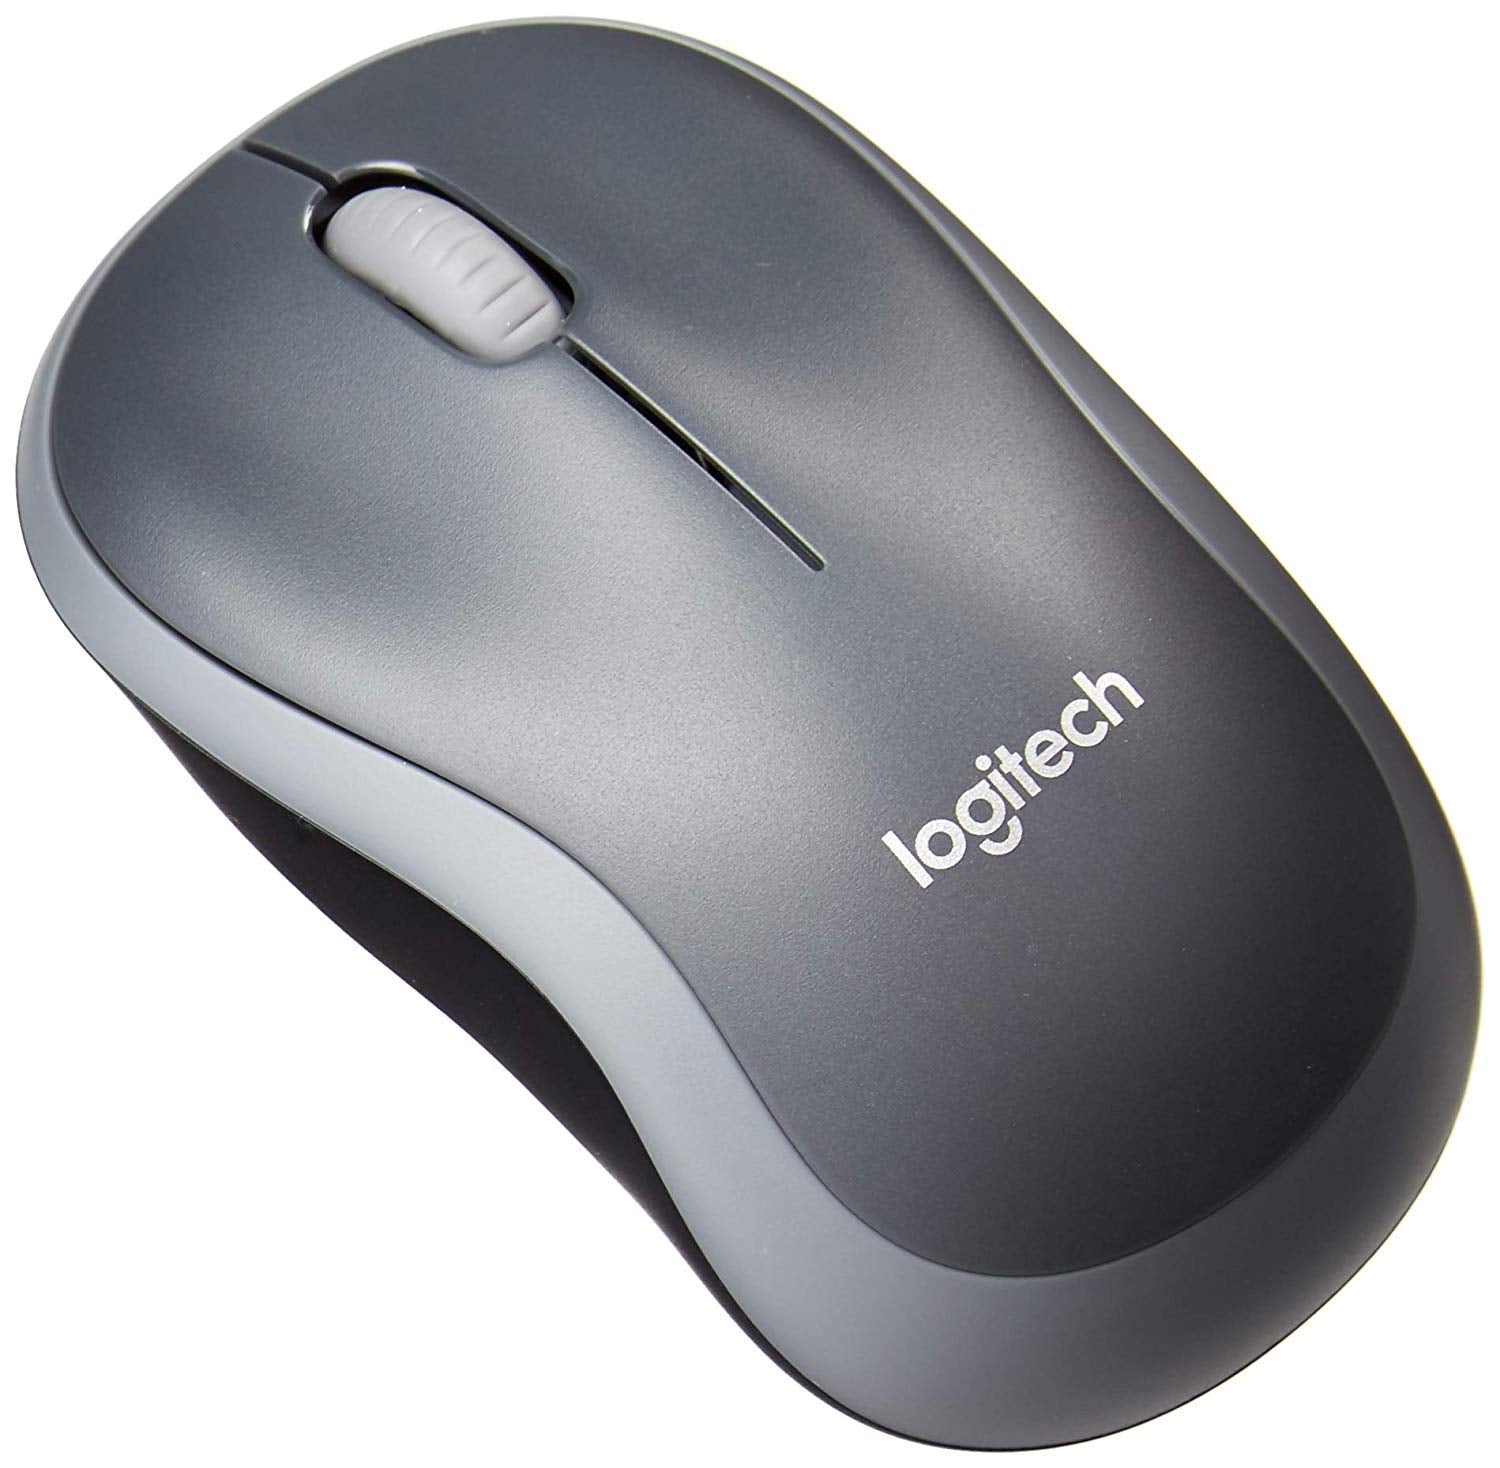 Logitech M185 Wireless Mouse for Computers Laptops Fast Scrolling Bundle (1-Pack + Stylus)